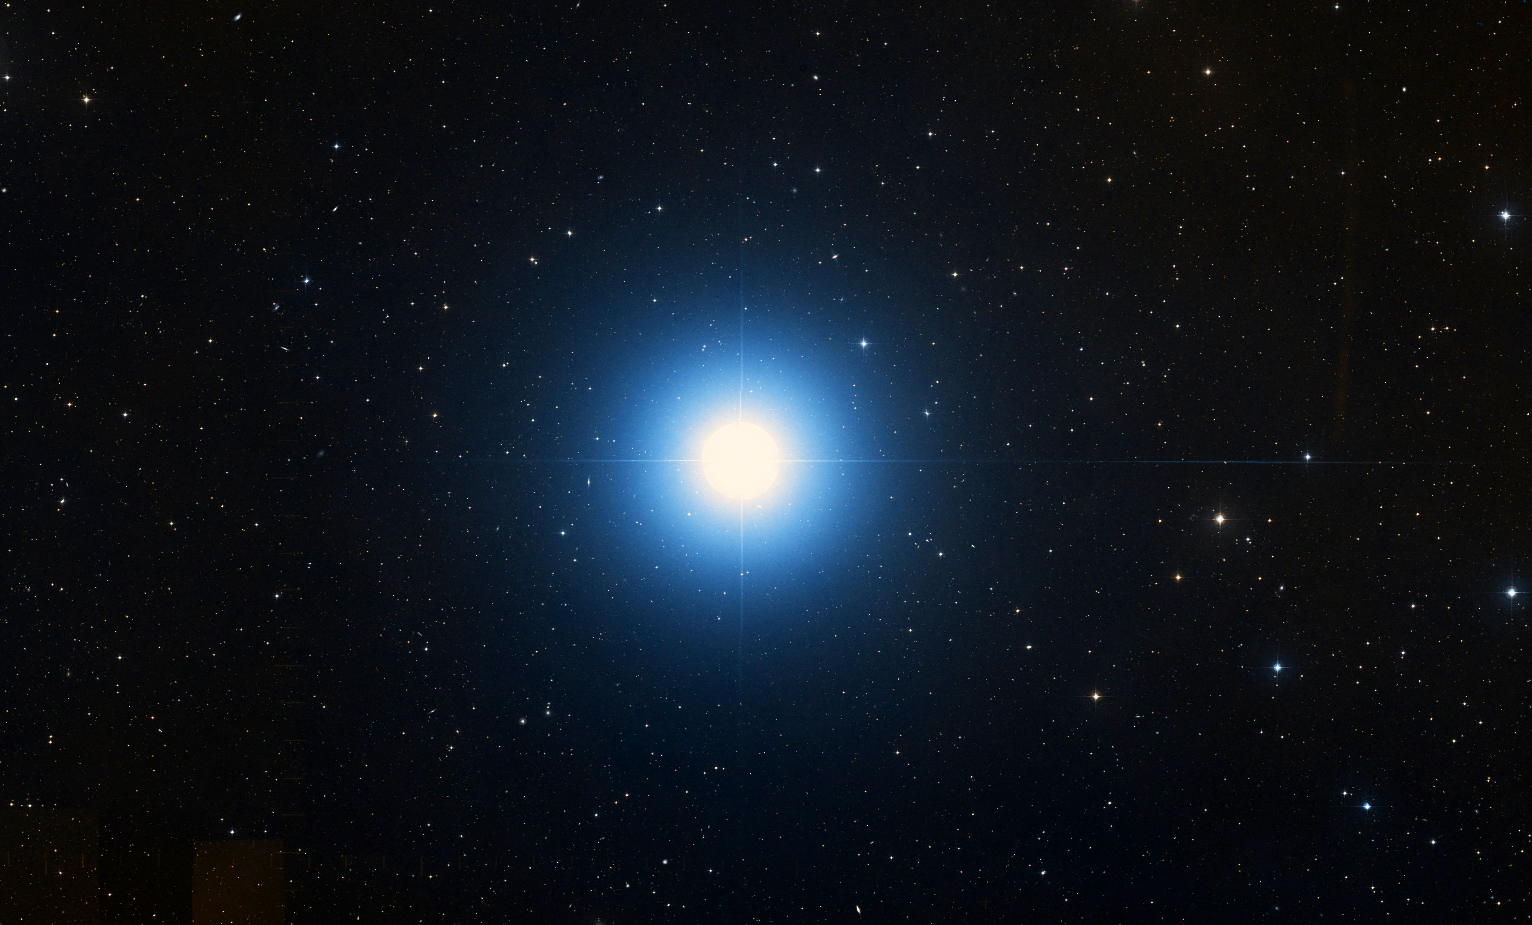 Exploring Spica, the Brightest Star in the Constellation Virgo